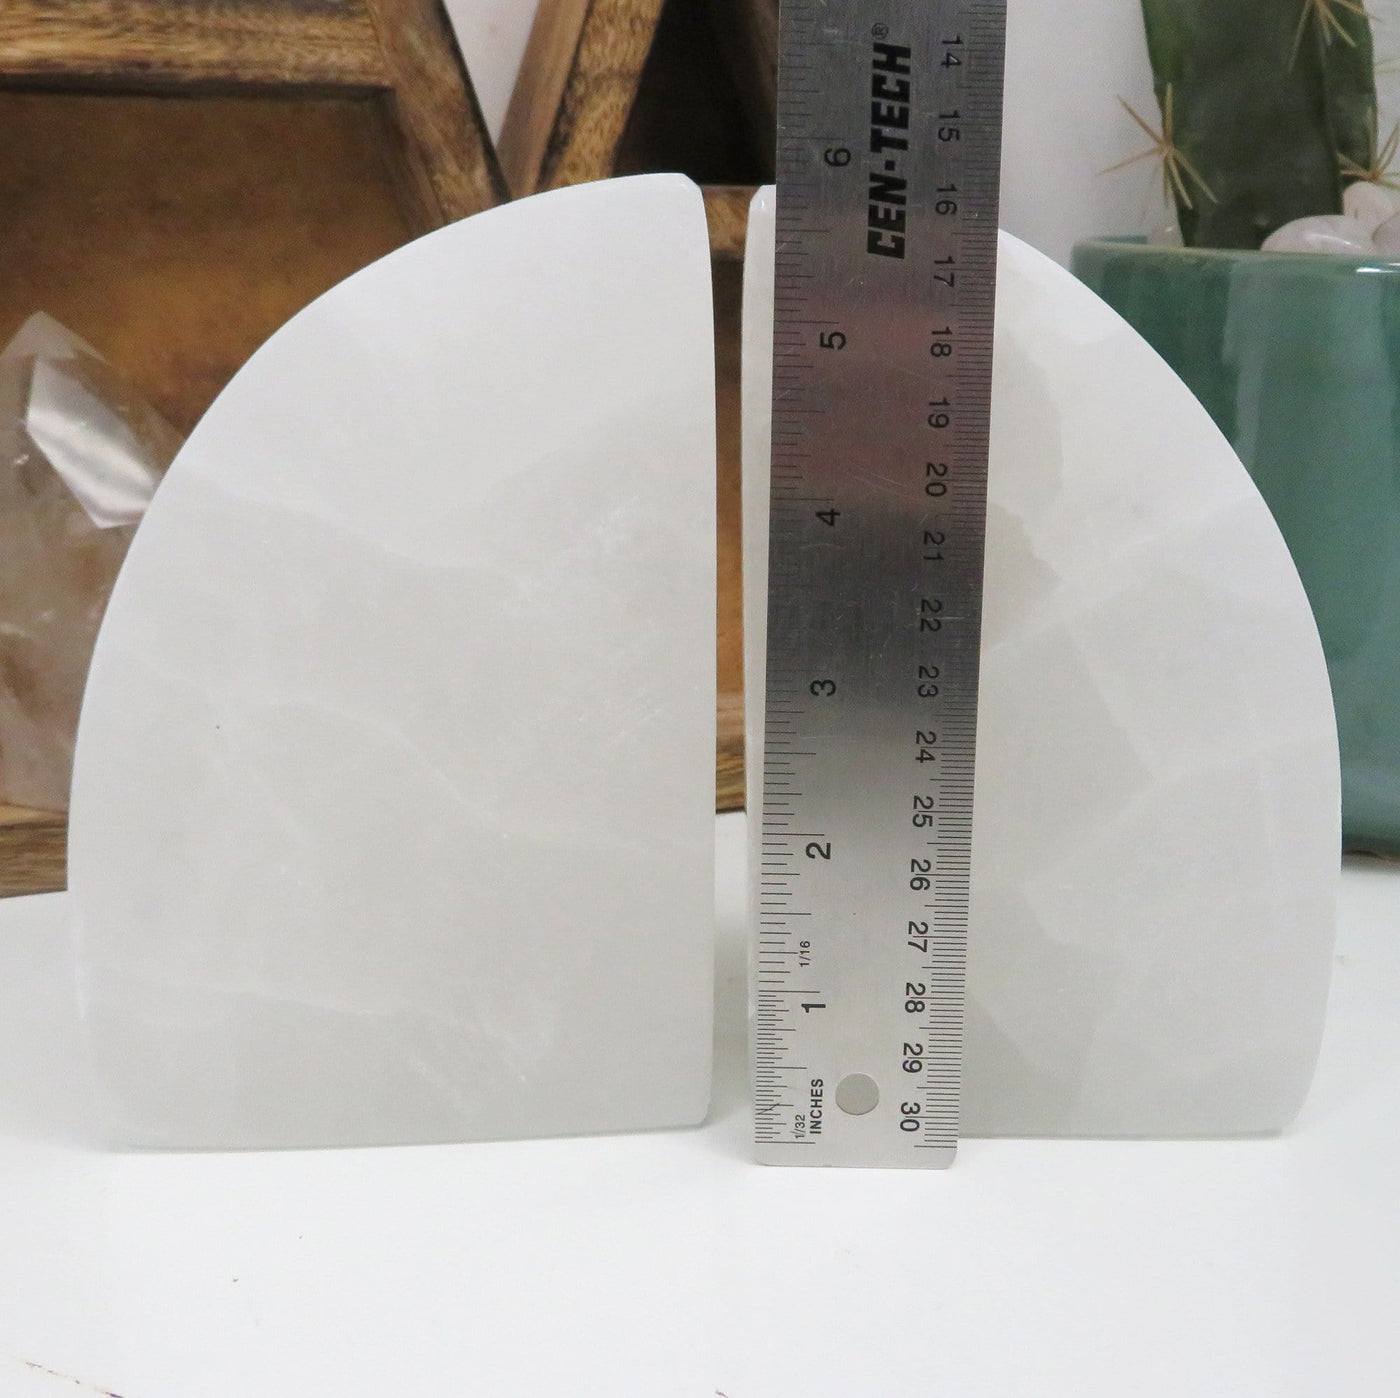 selenite book ends with ruler for size reference 